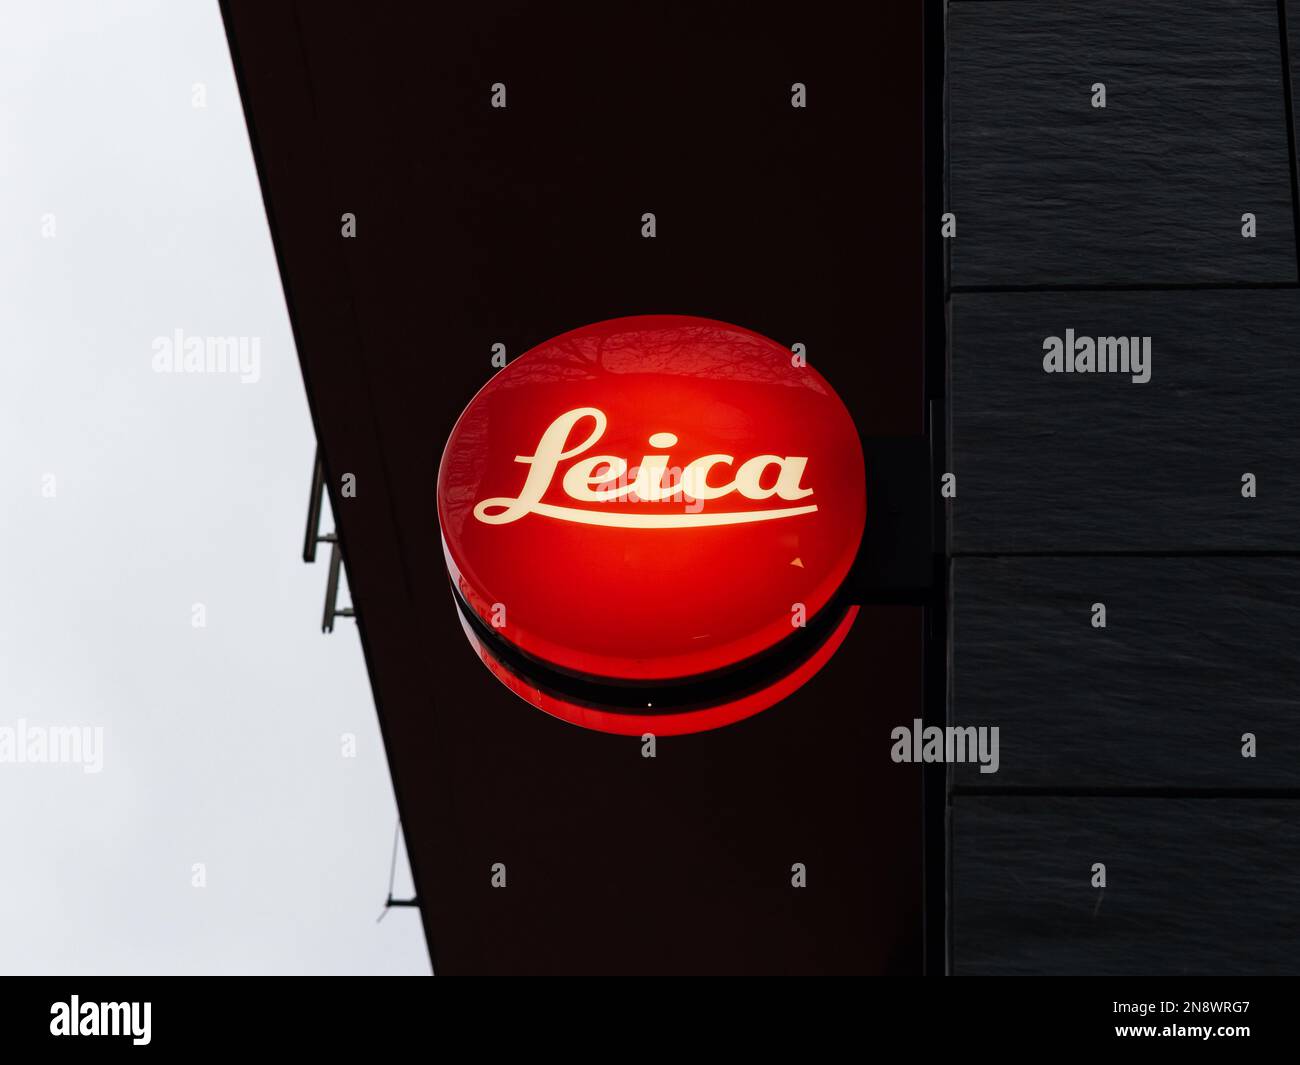 Leica camera logo on a store building in the city. Illuminated sign of the German manufacturer. High precision engineered camera and lens systems. Stock Photo